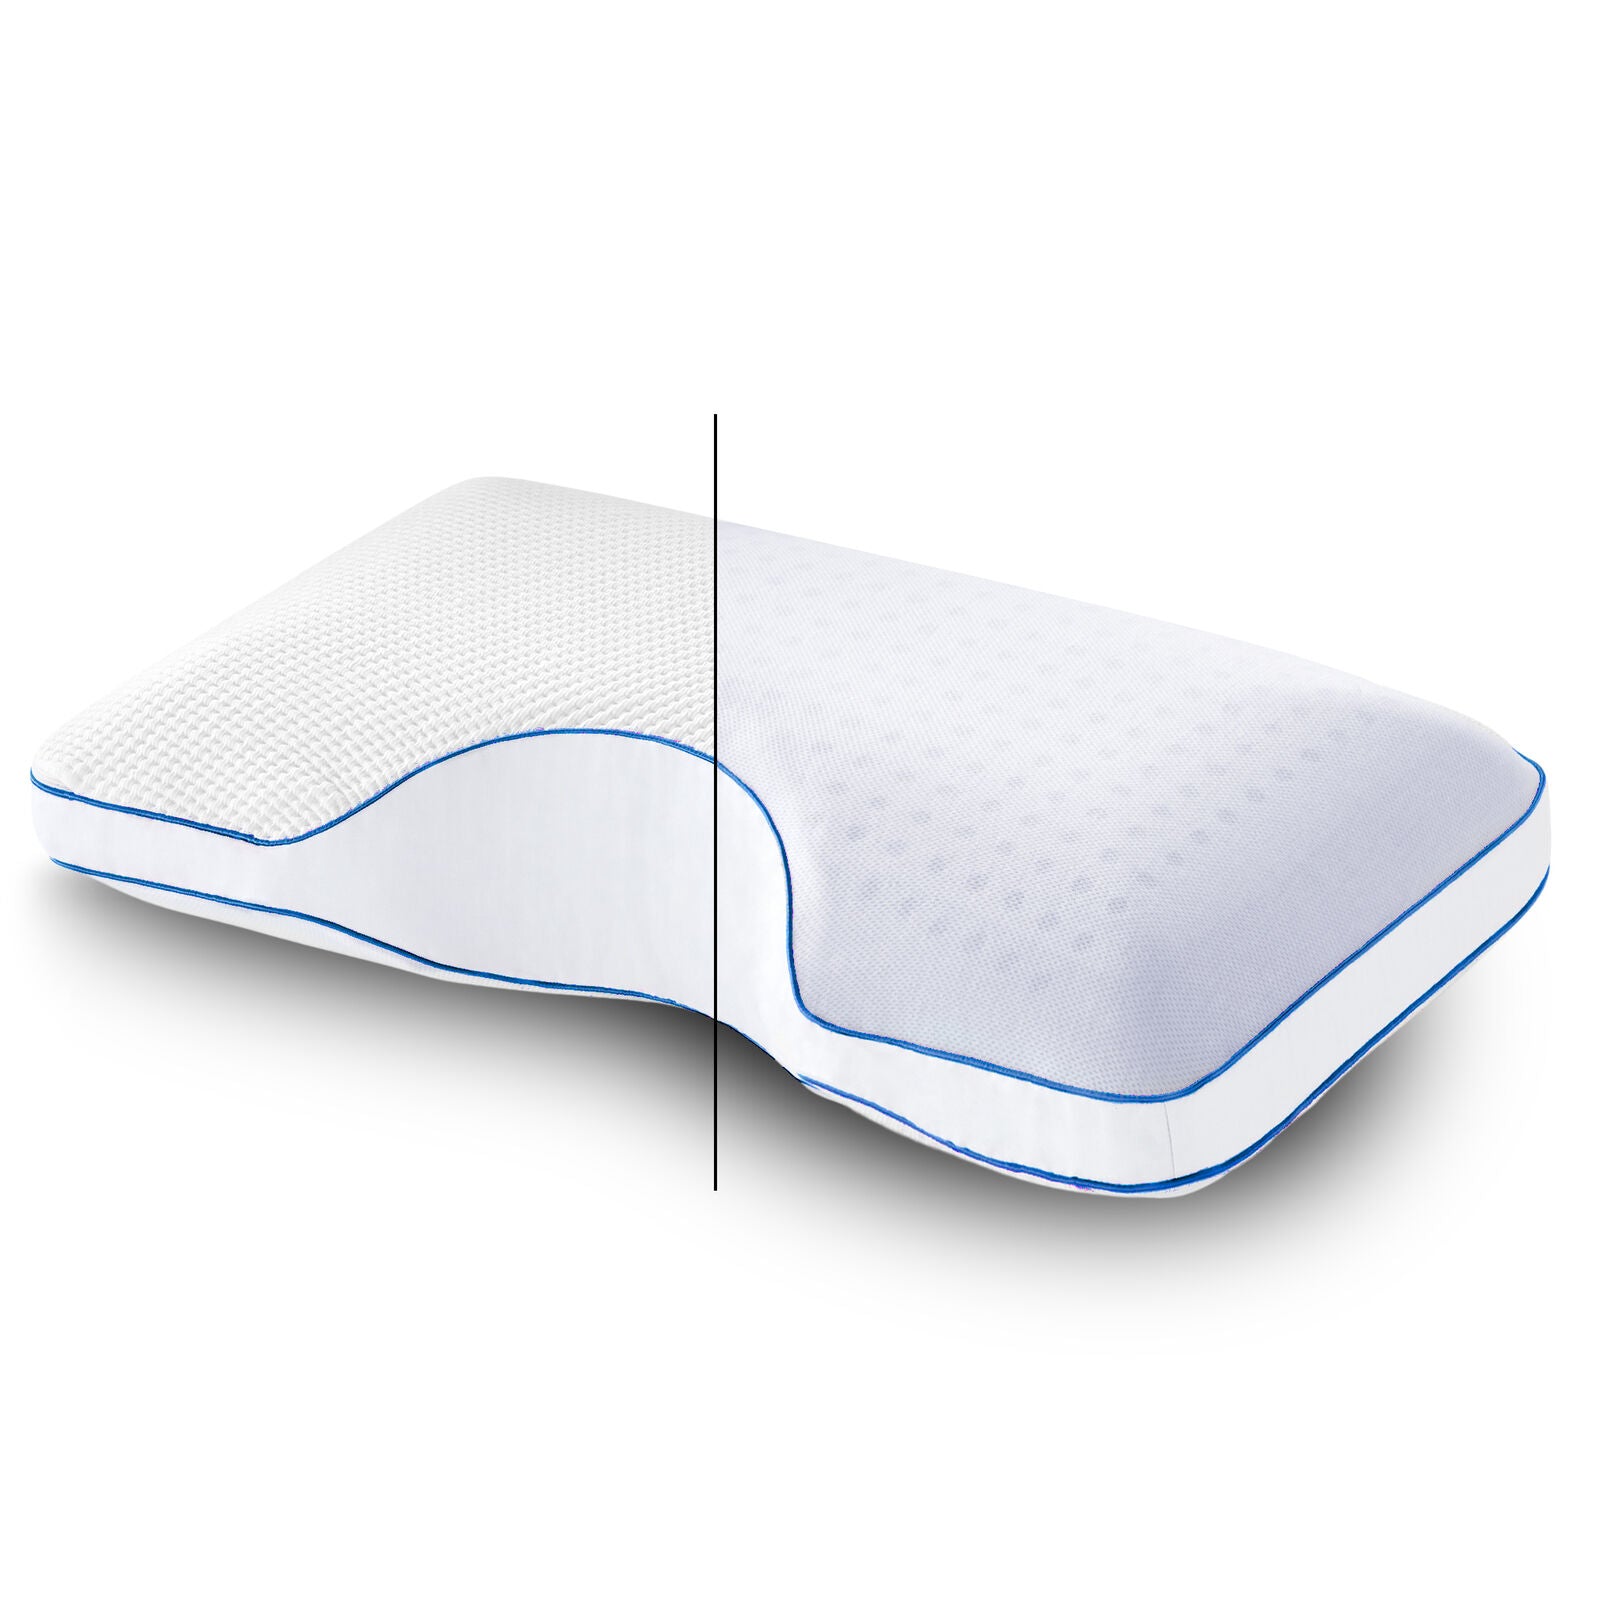 Pillows - Memory Foam Pillow With Cooling Gel - Side Sleeper, King, or Queen - Side Sleeper / King